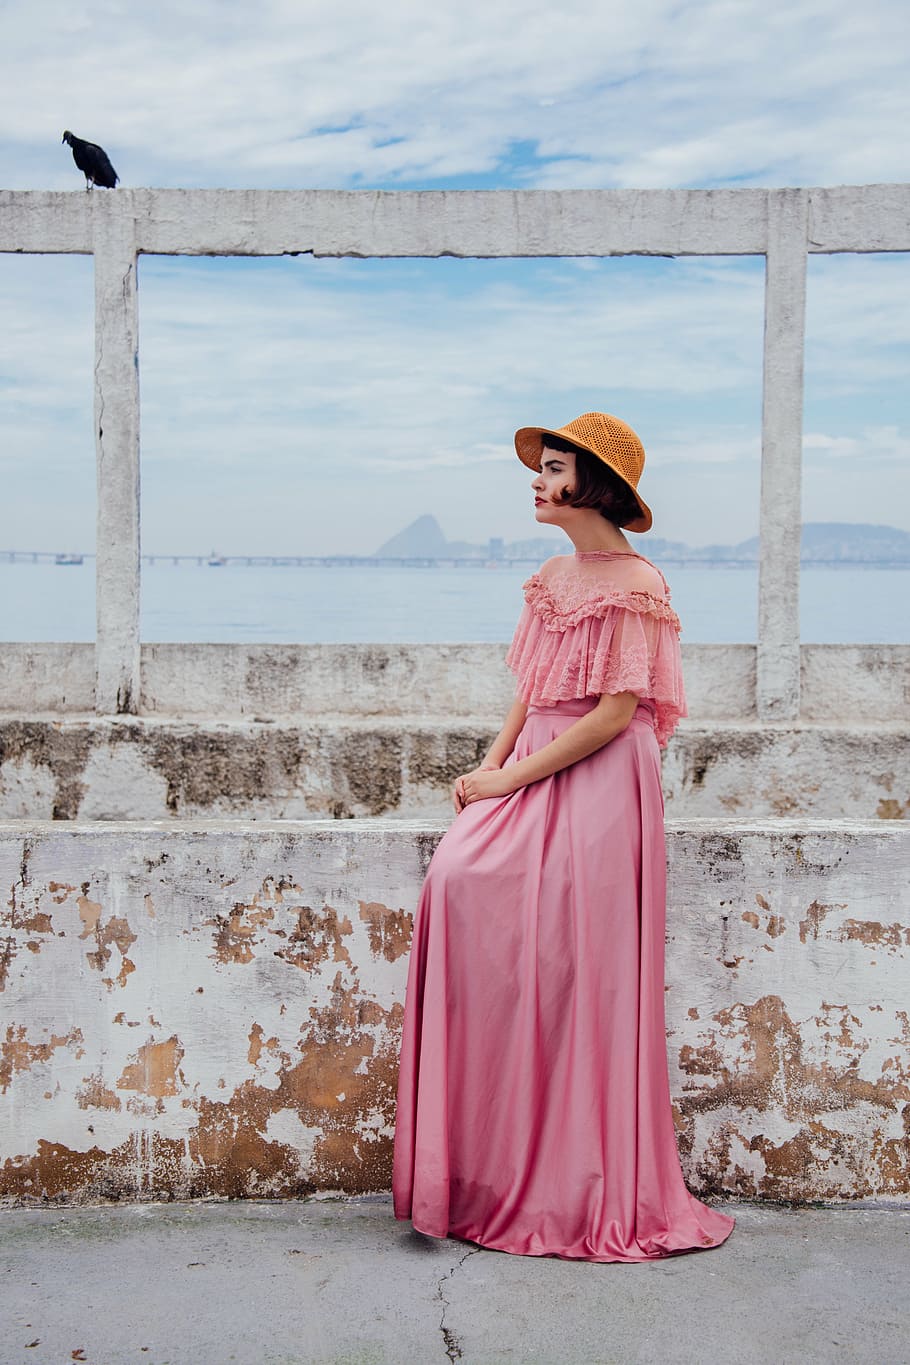 woman in pink dress standing beside wall during daytime, floor